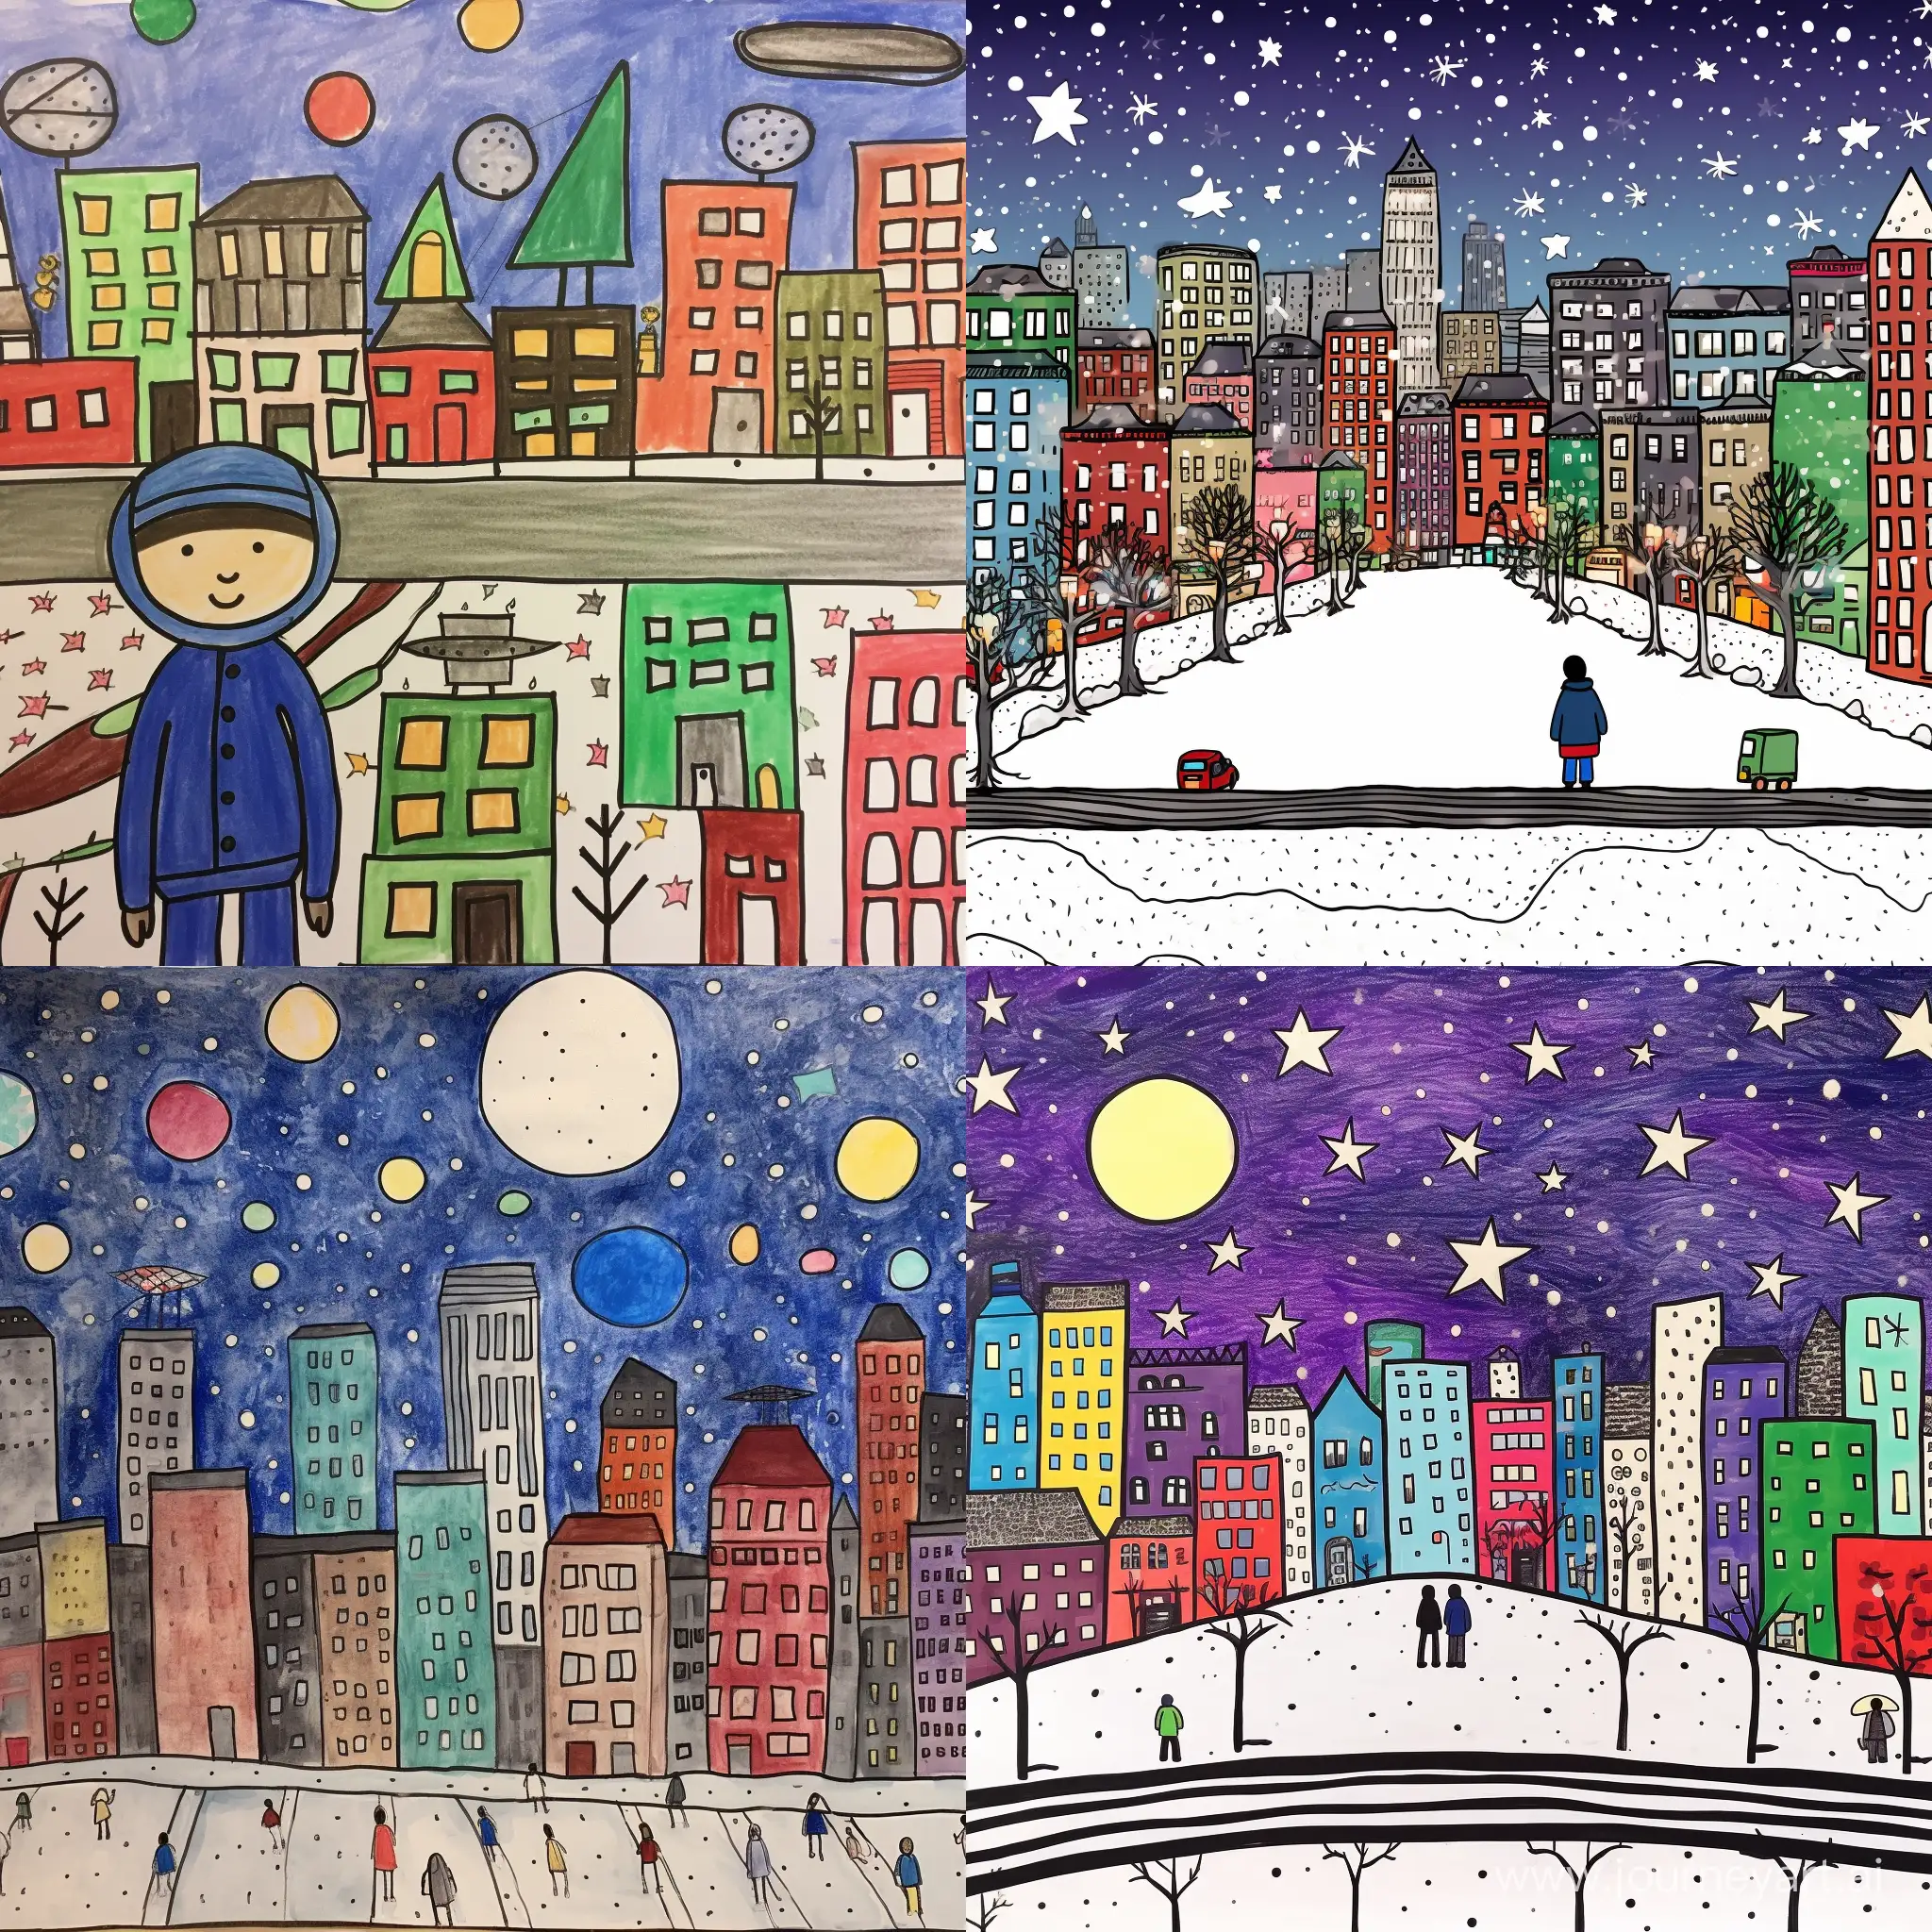 Winter-Cityscape-with-Surreal-Spaceship-and-Hopeful-Child